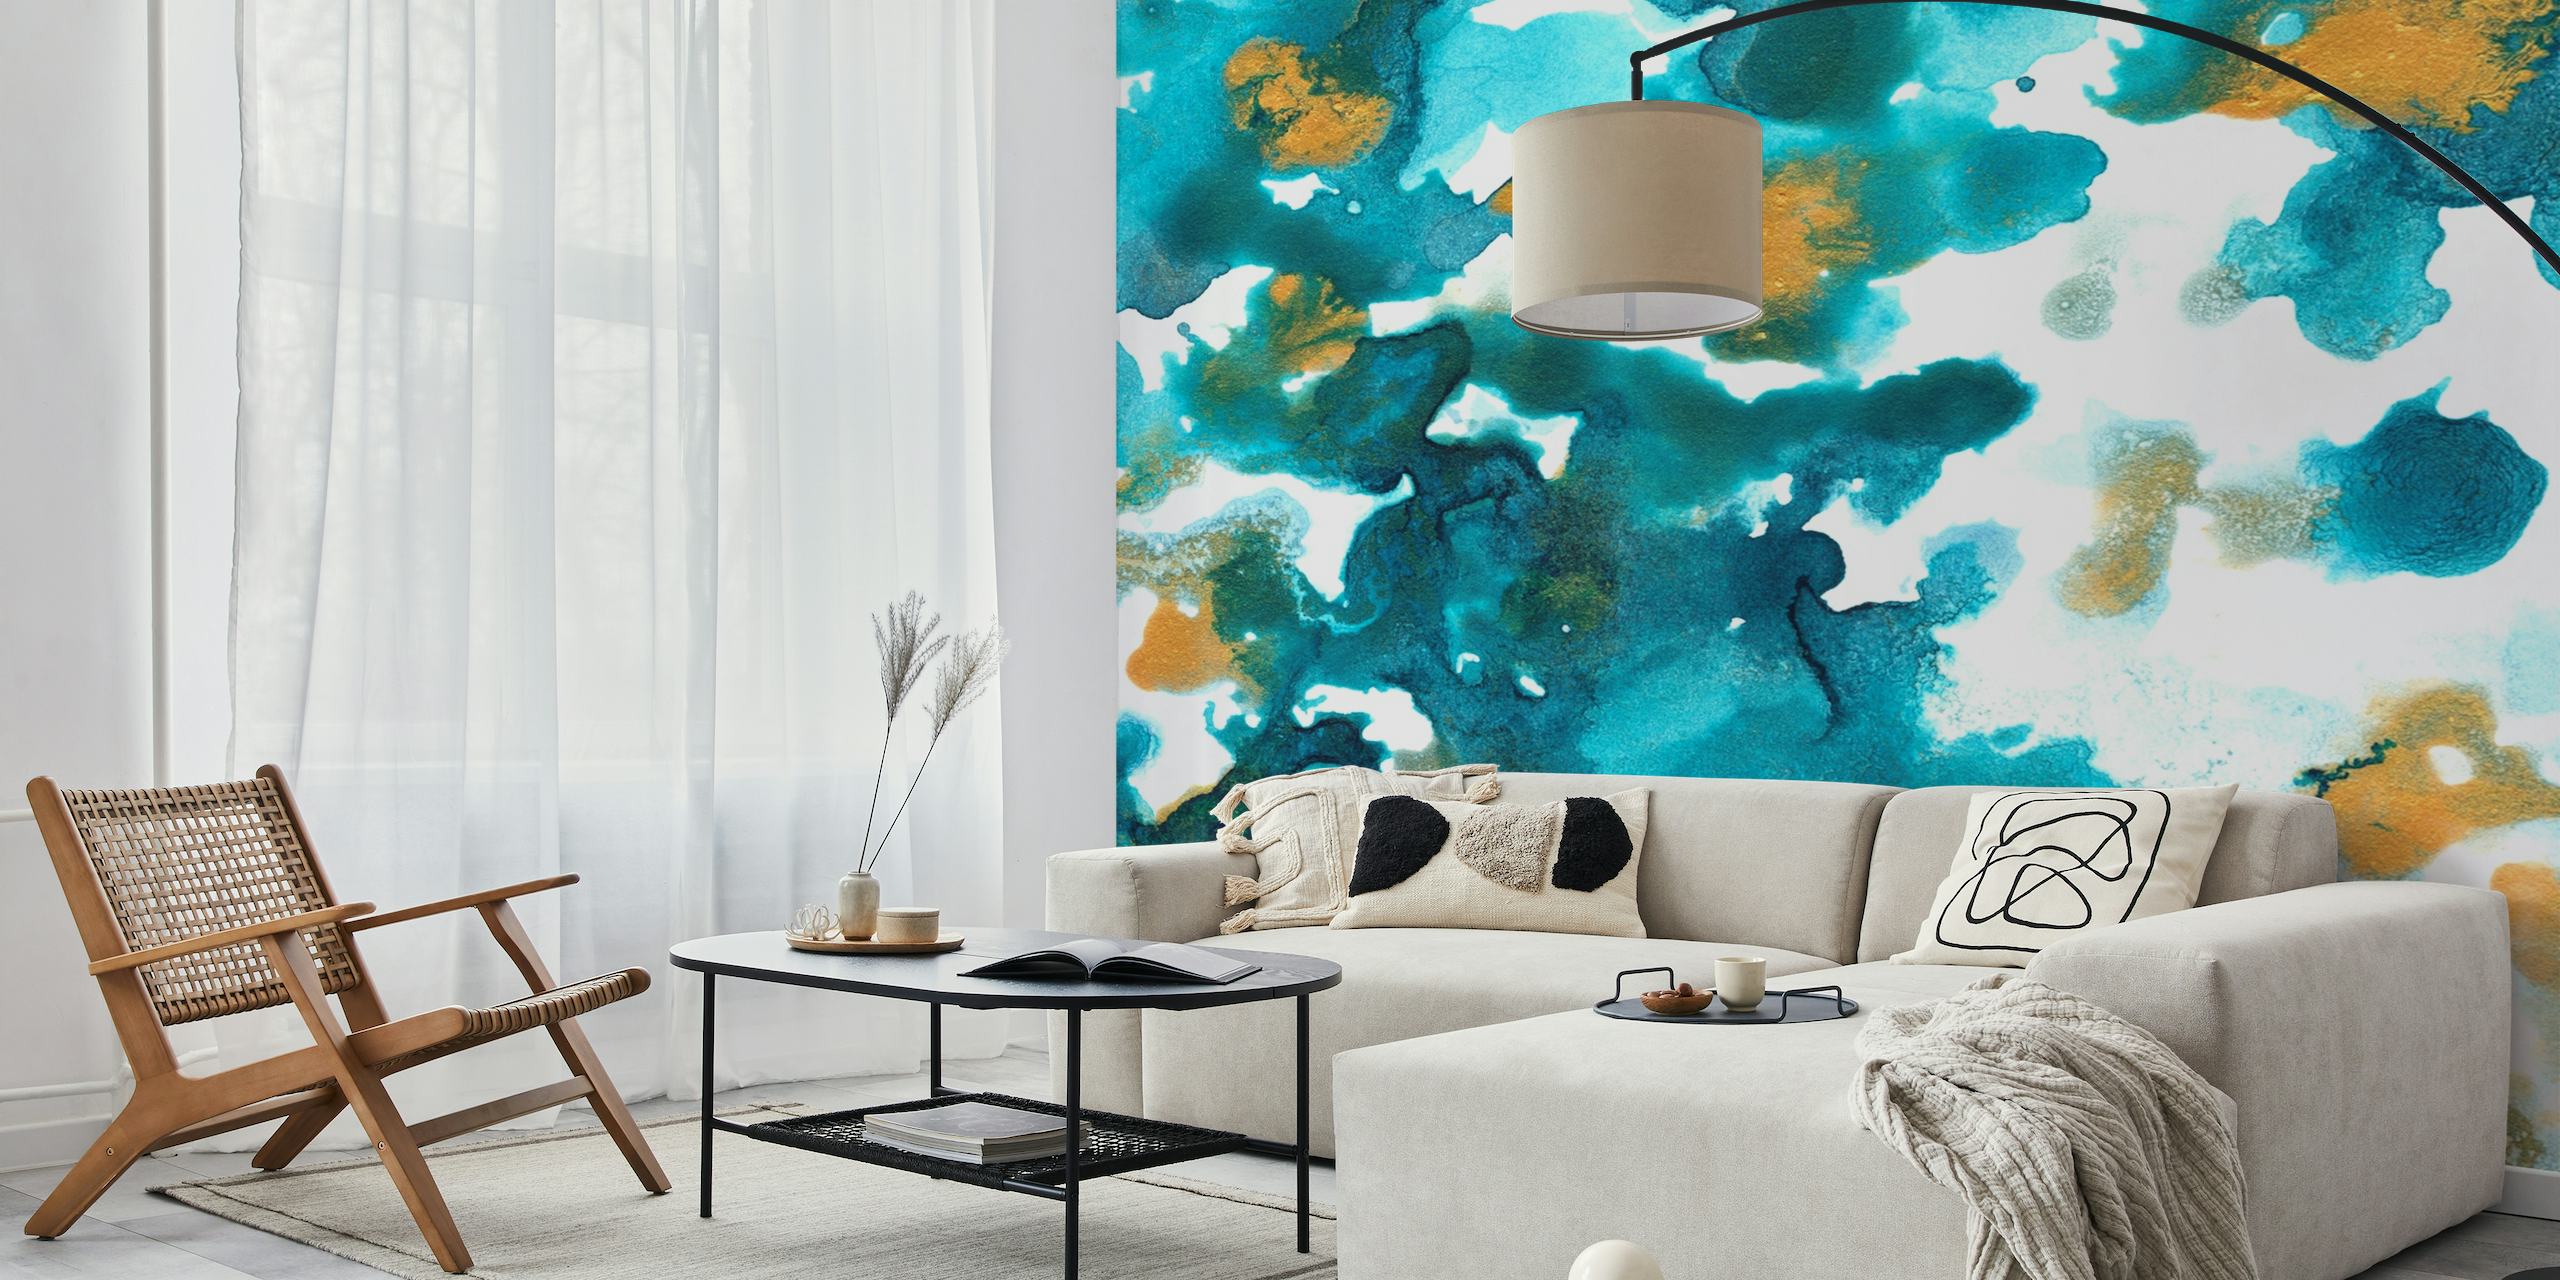 Abstract aqua, teal, and gold wall mural, features fluid art design